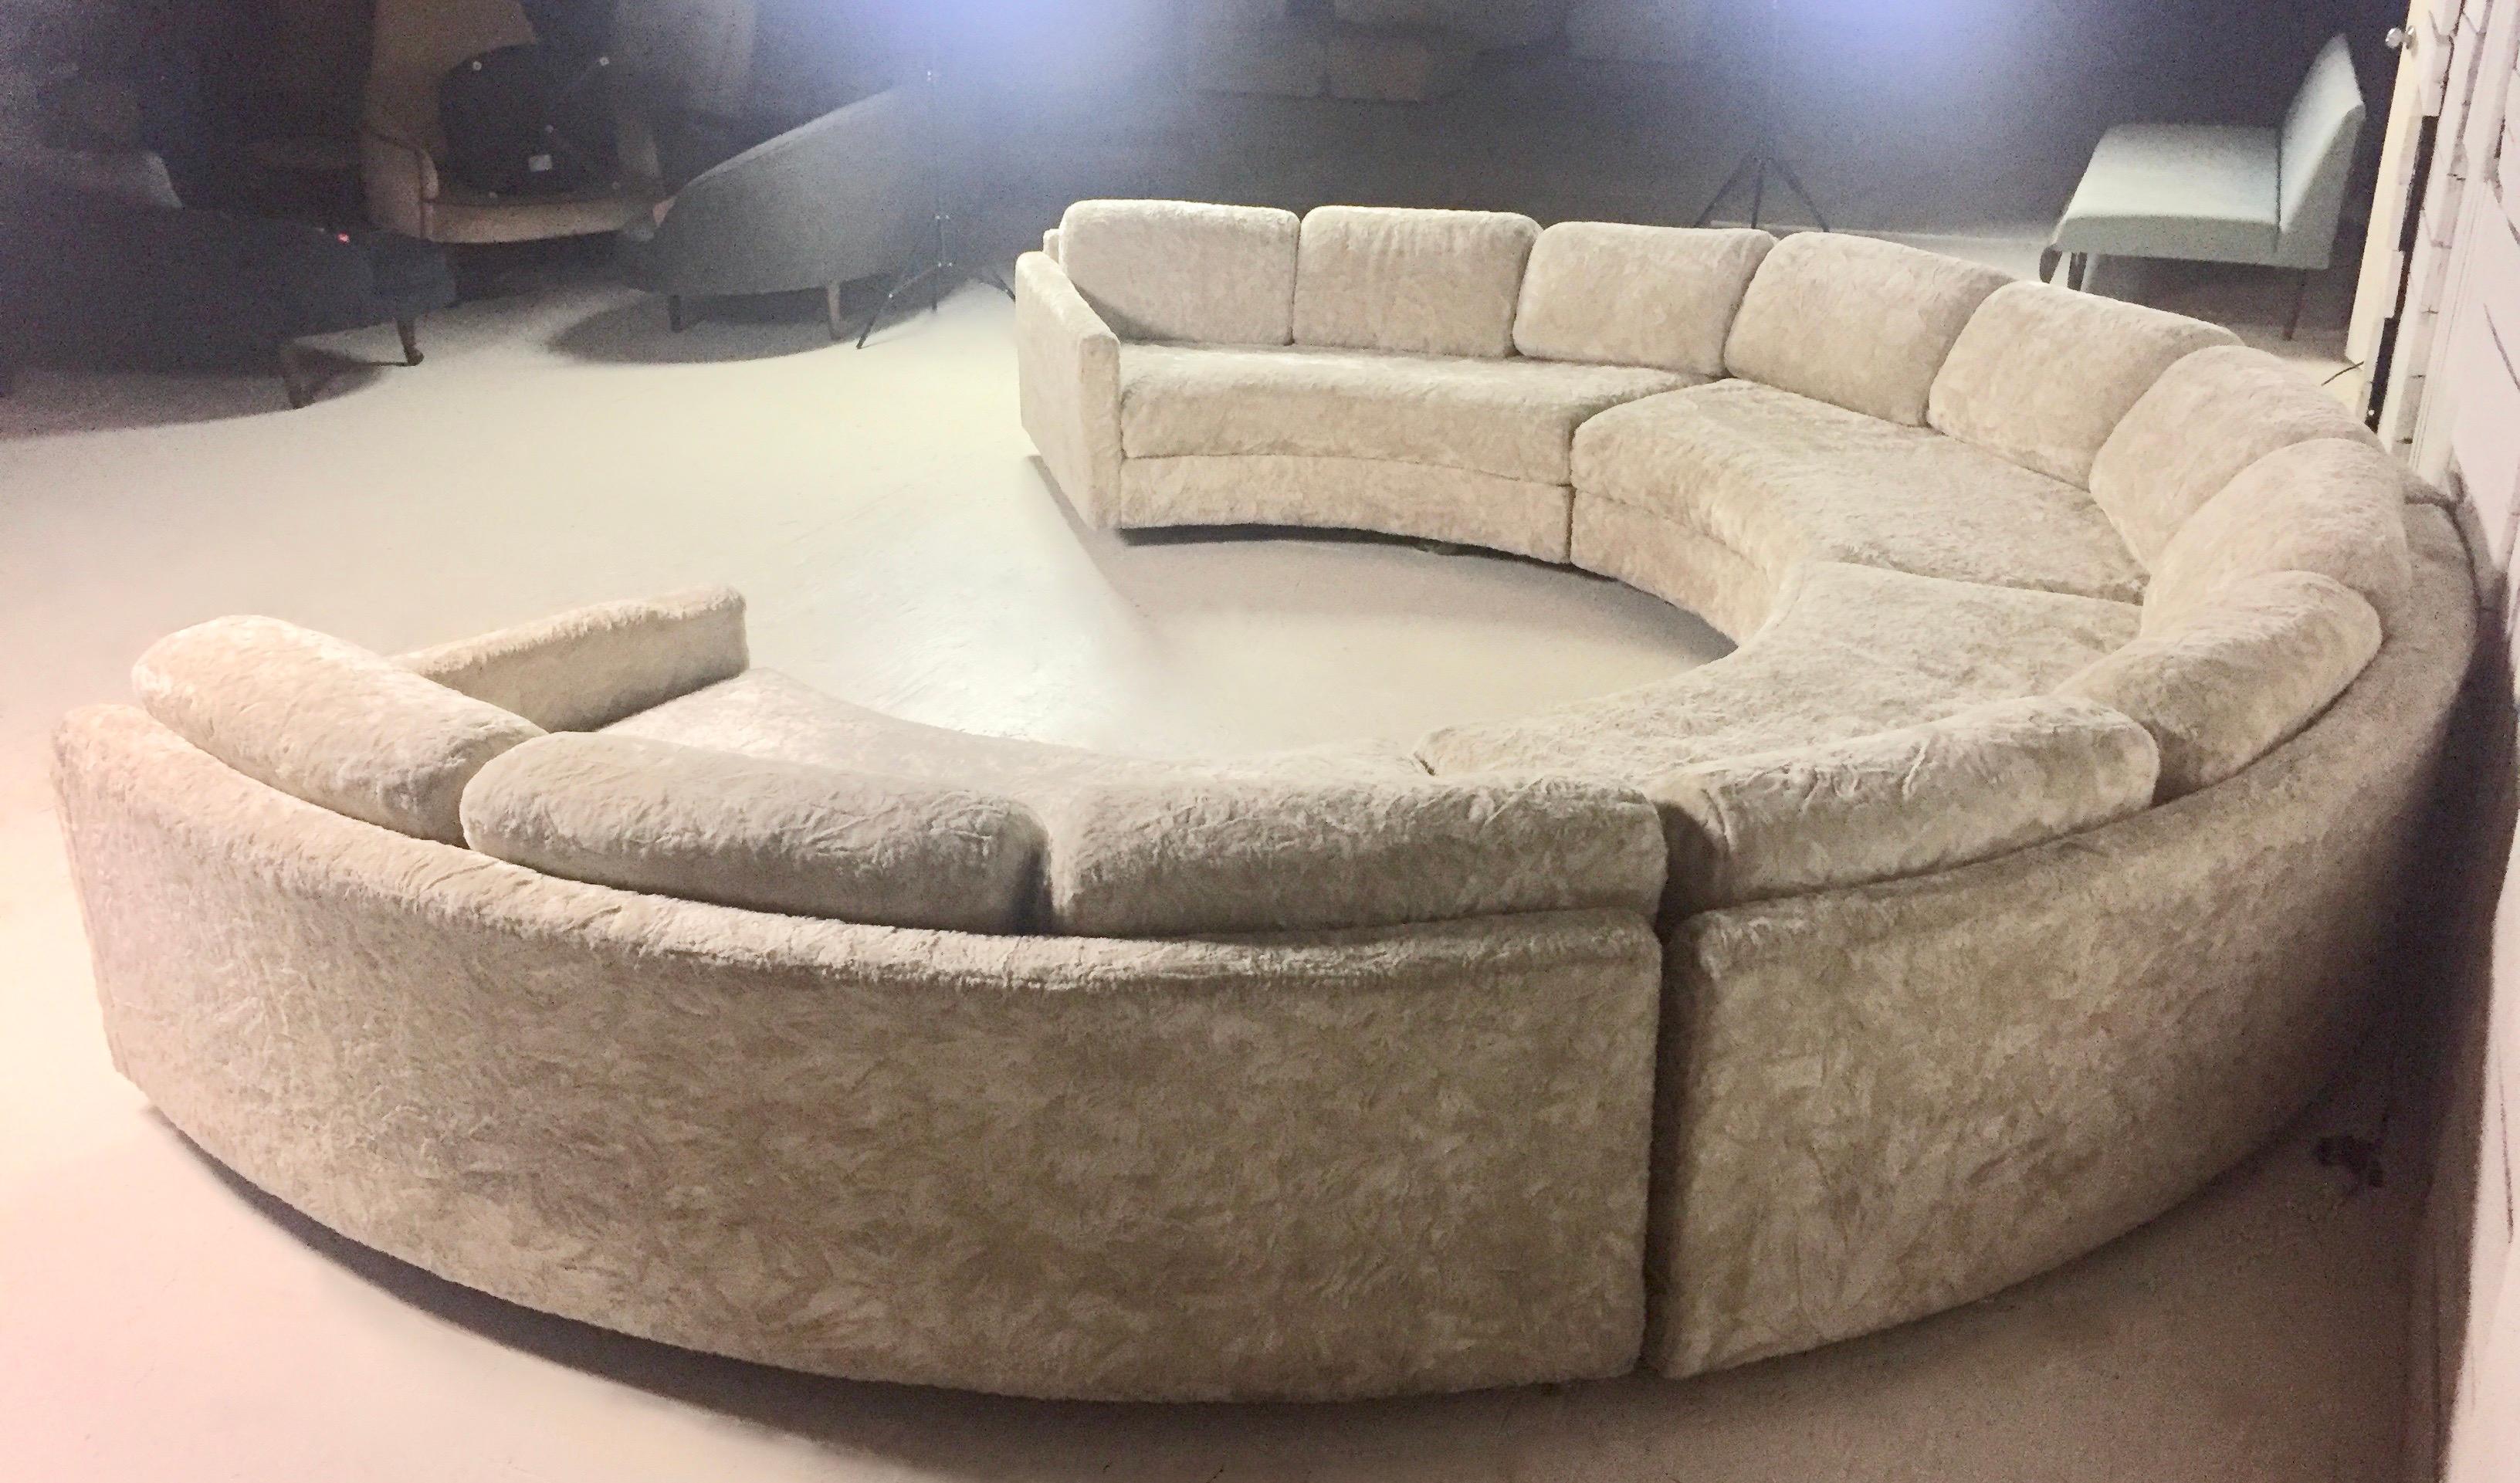 Late 20th Century Adrian Pearsall Semi-Circular Ivory Crushed Velvet Curved Sectional Sofa